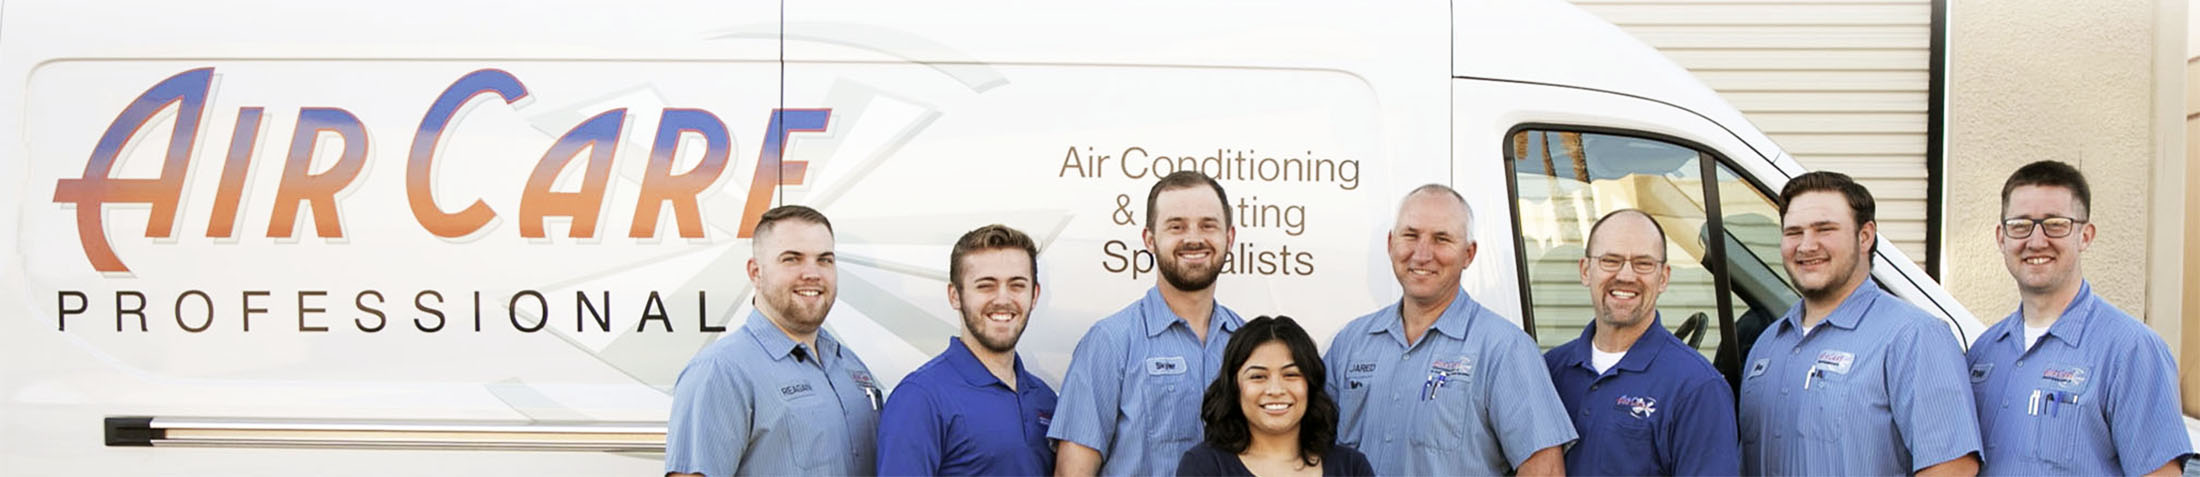 The AirCare team is ready to help.